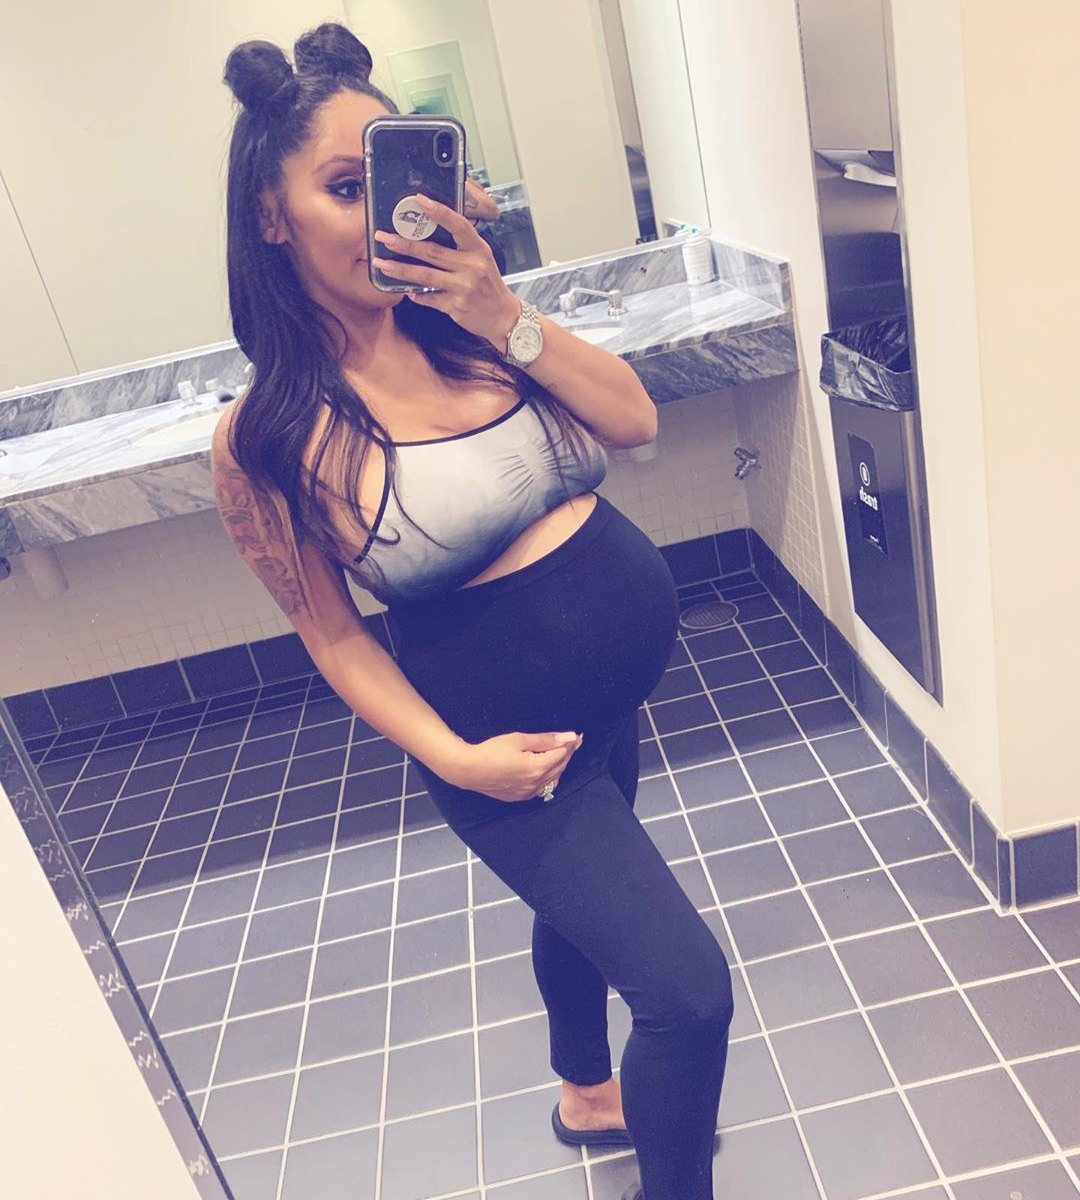 Snooki Flaunts Her Postpartum Weight Loss on Instagram: See Photo